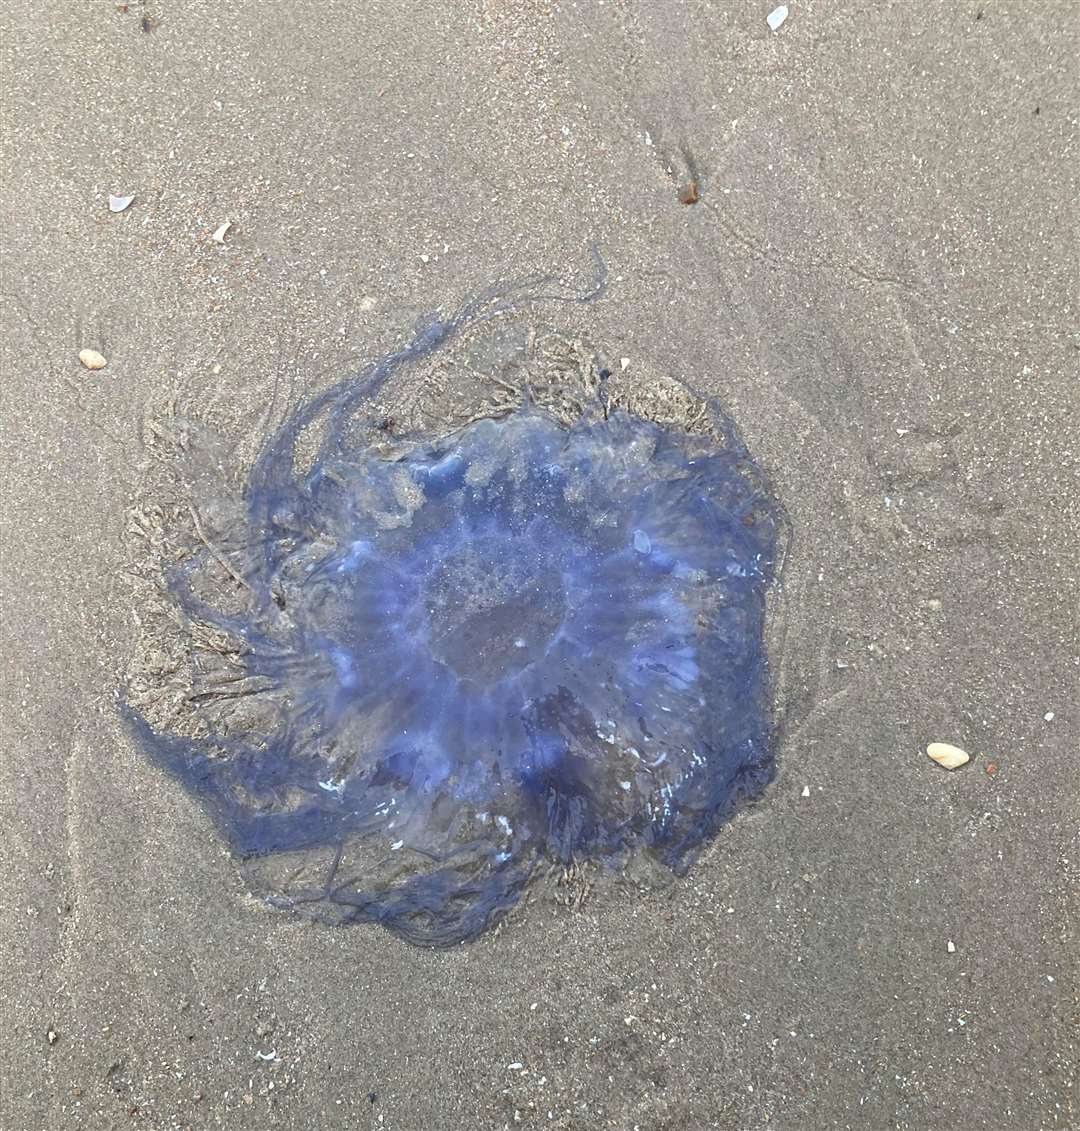 The creatures are likely to be blue jellyfish and moon jellyfish. Picture: Jenni Regan